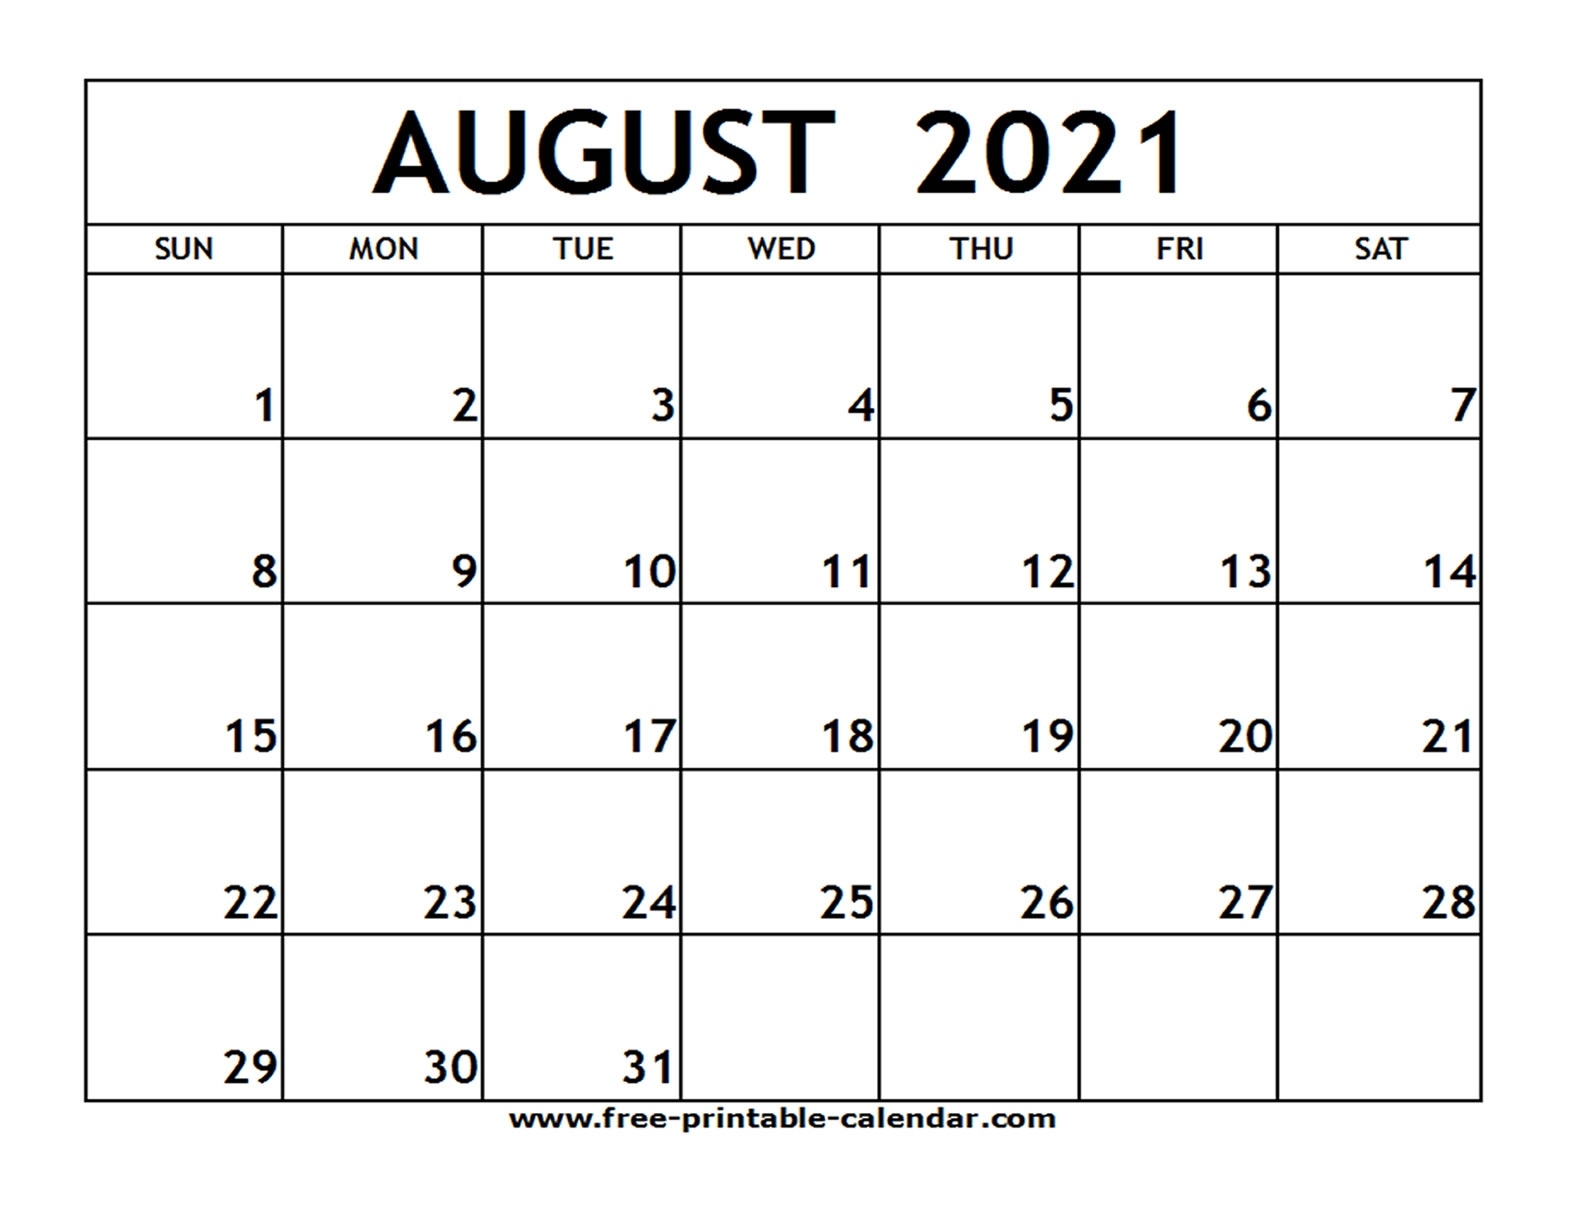 Printable Monthly Calendar August 2021 | Free 2021 Printable Calendars 2021 Calendar For July And August